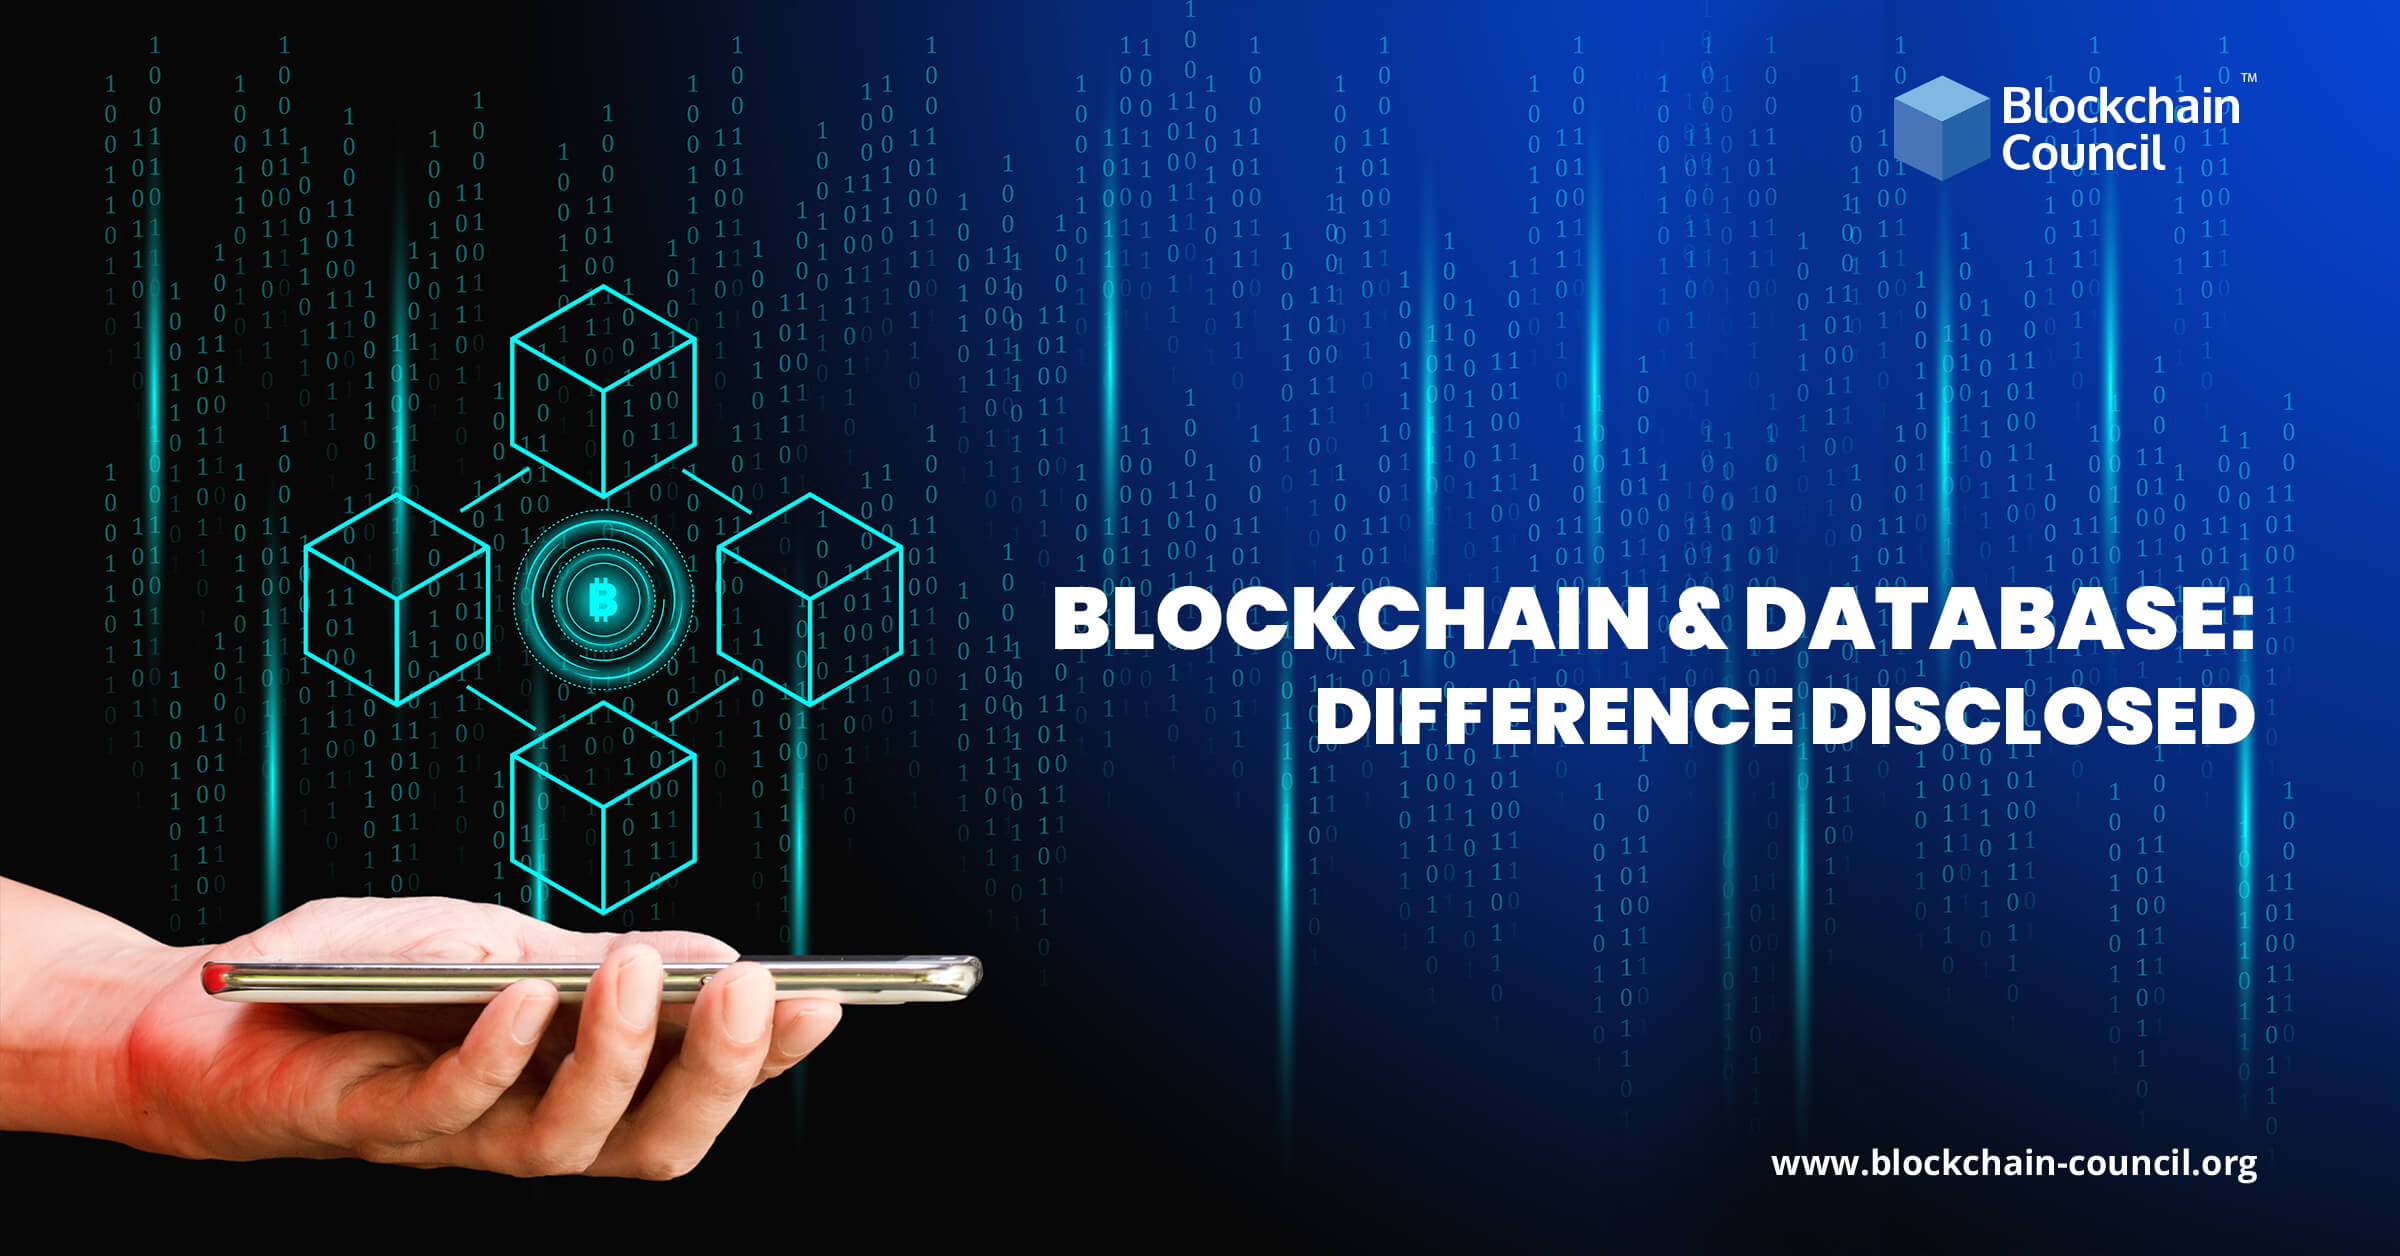 Blockchain & Database Difference disclosed